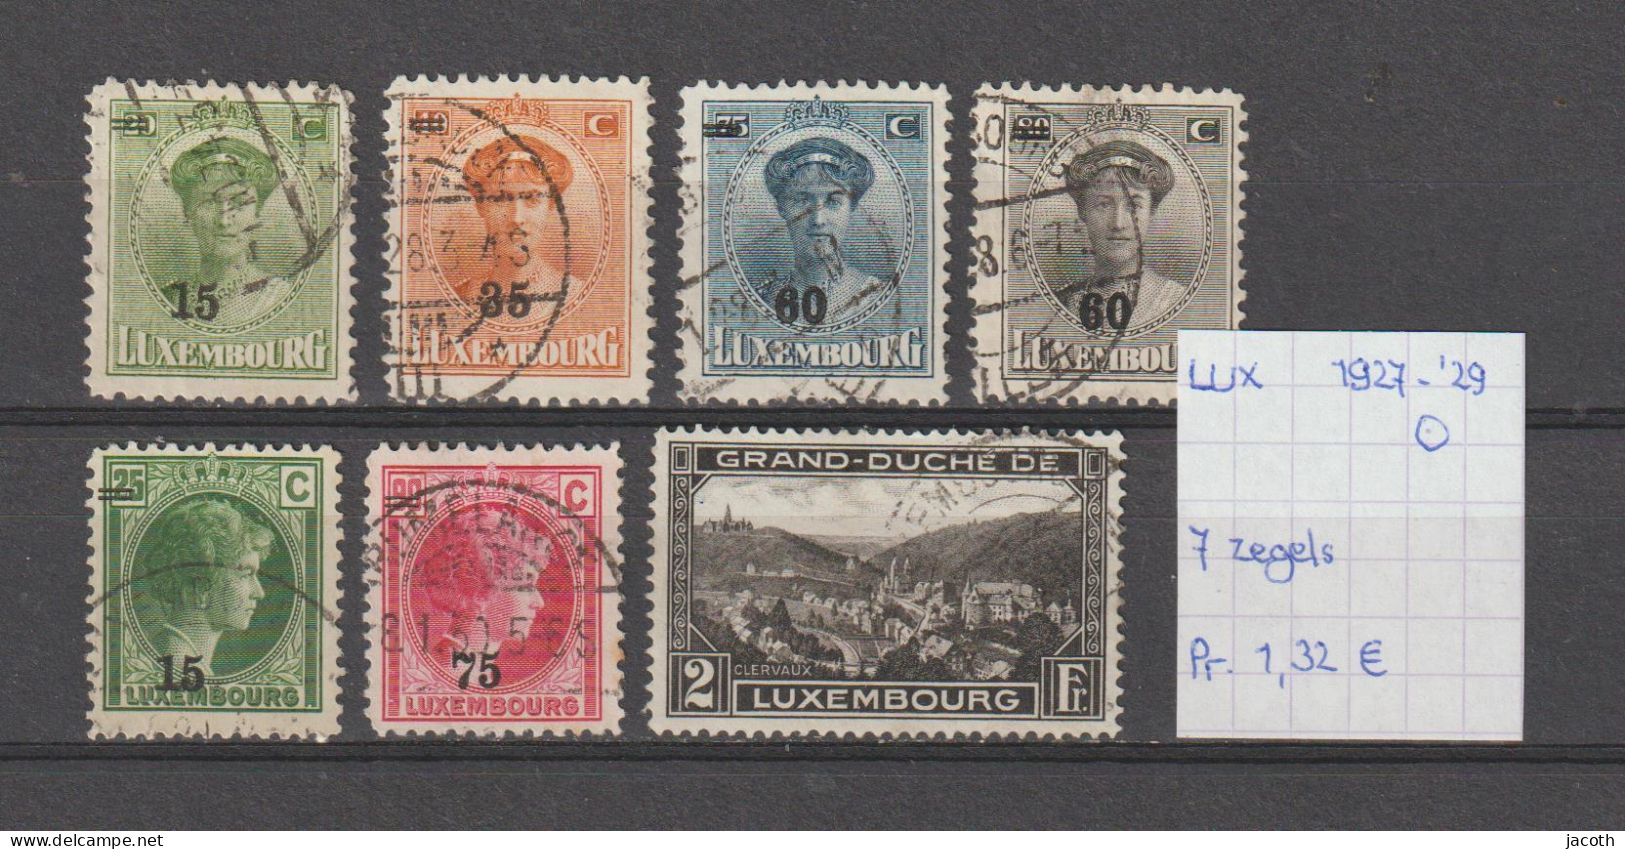 (TJ) Luxembourg 1927-29 - 7 Zegels (gest./obl./used) - Used Stamps